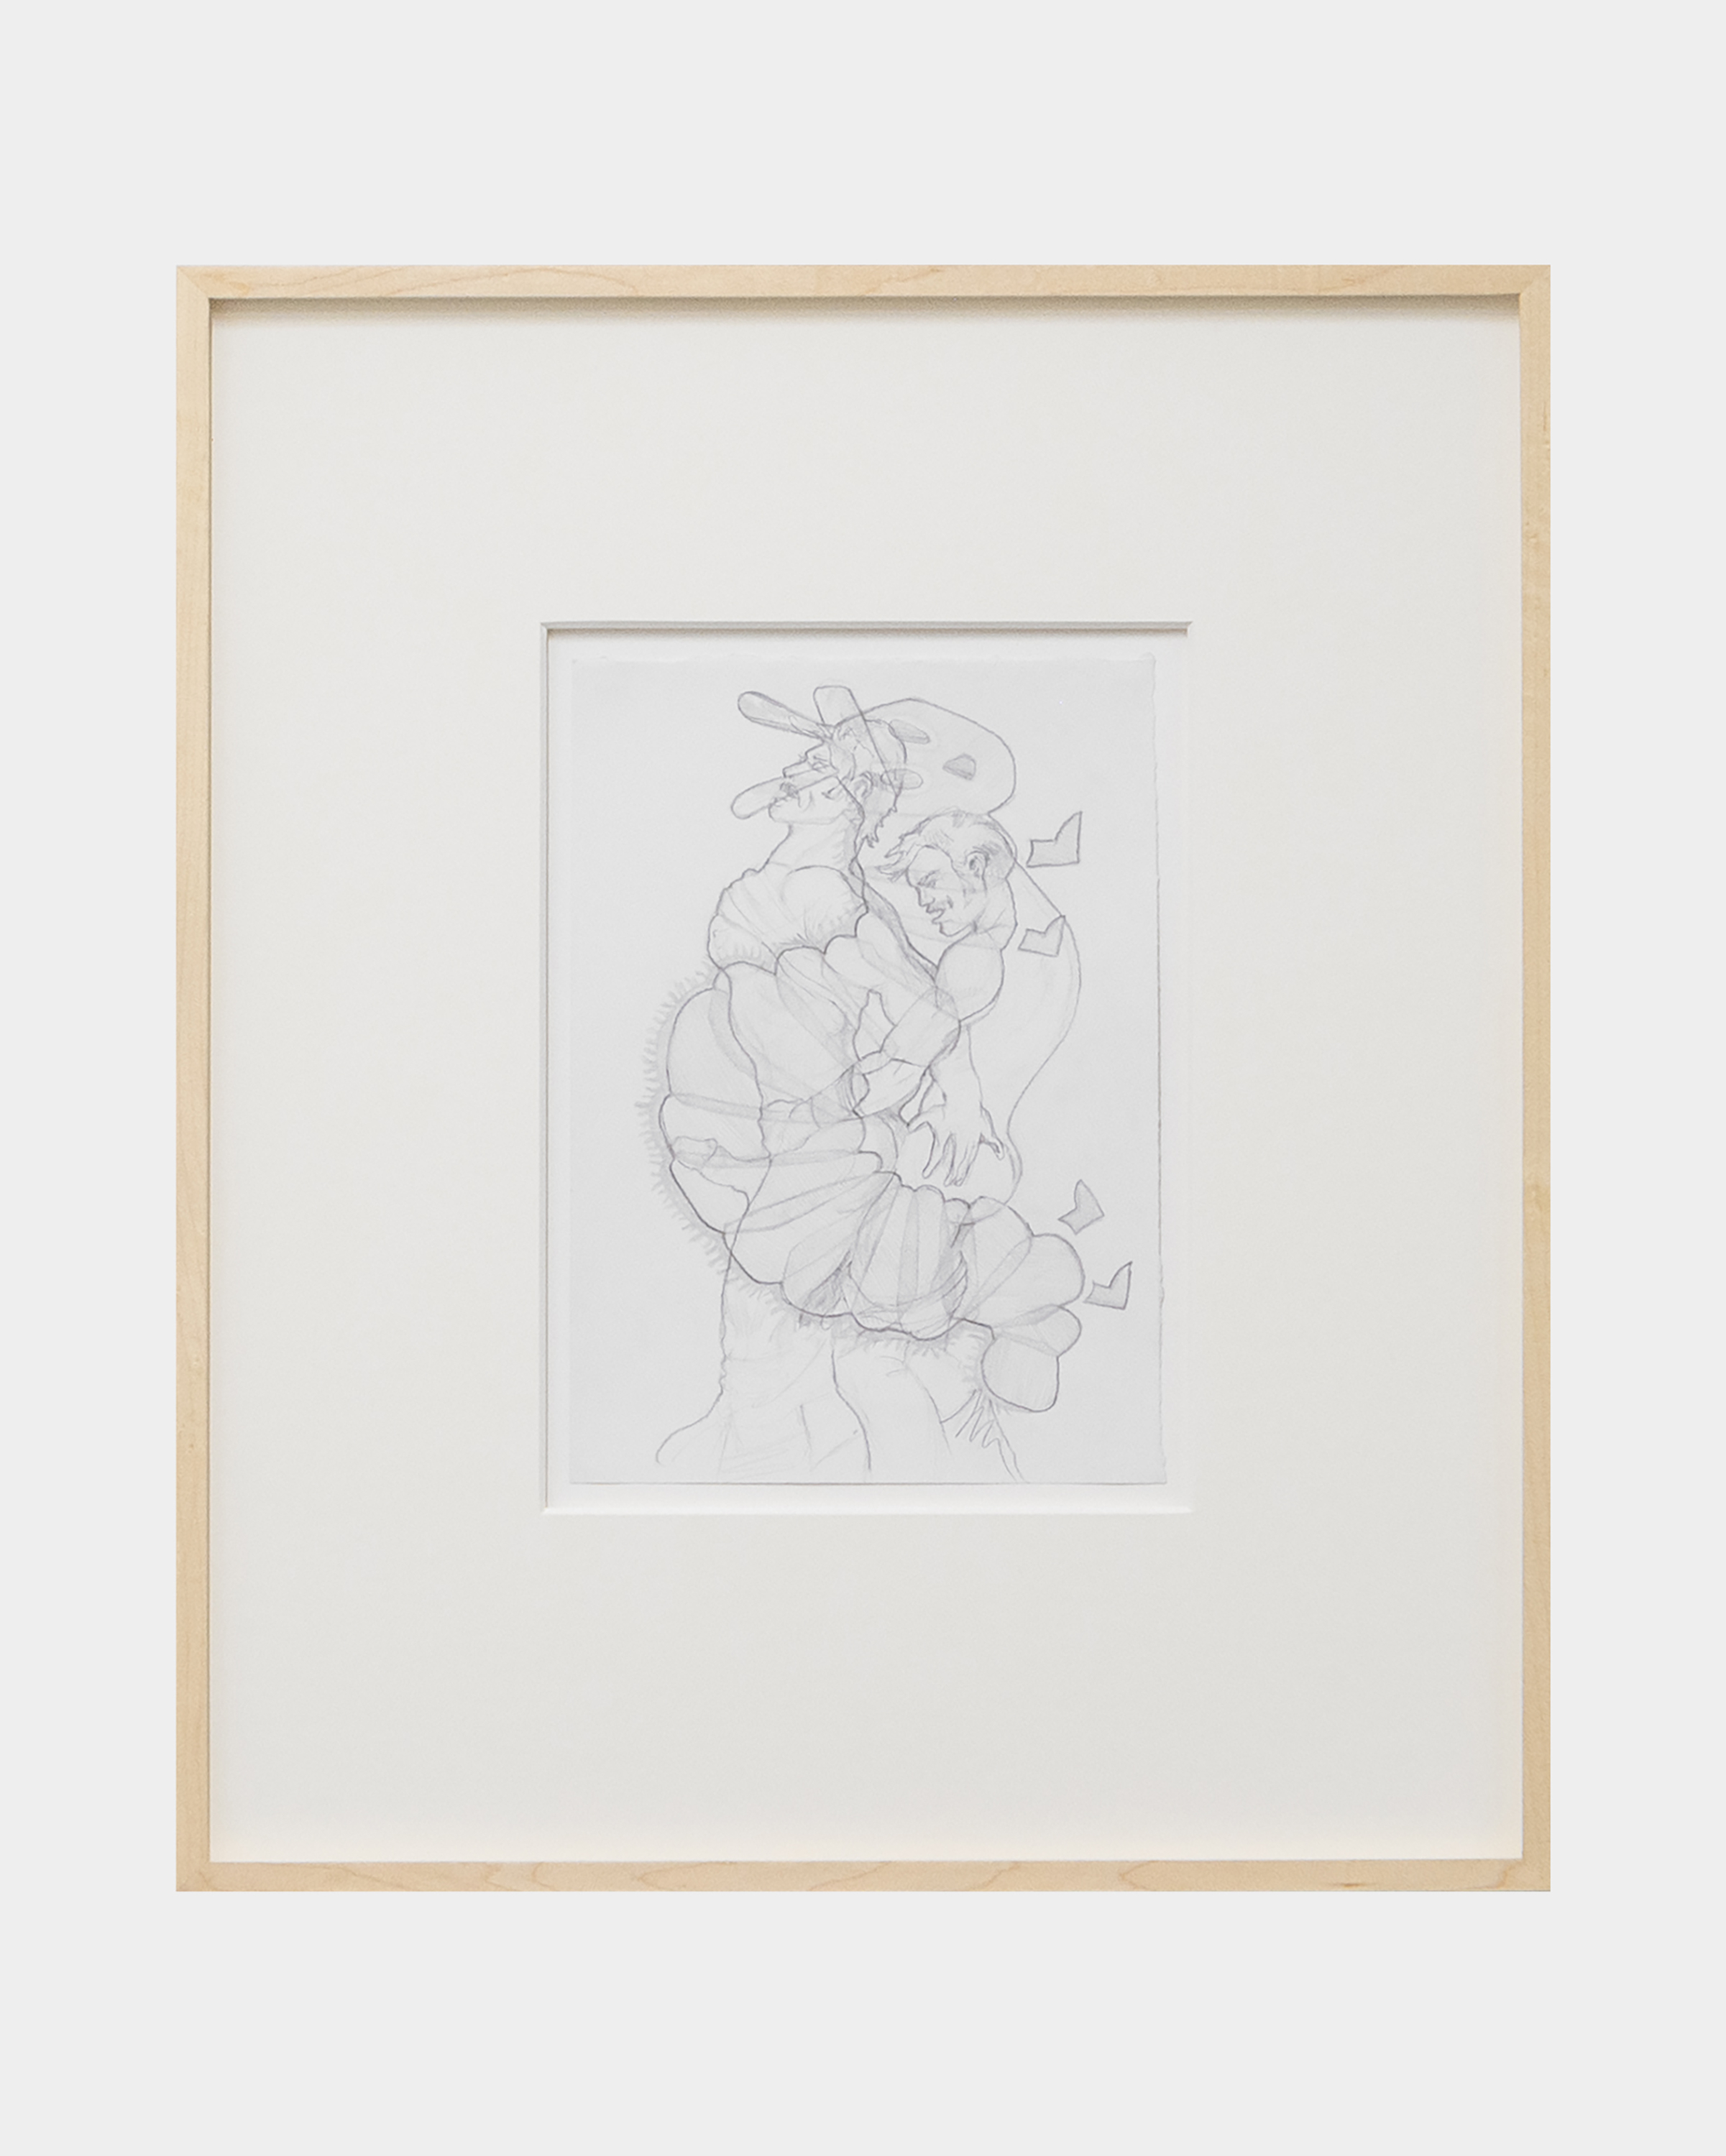 Daniel Moldoveanu, Untitled (Eric Carle, Tom of Finland), 2024 Pencil on paper in artist’s frame, 49,2 x 58, 2 x 3,2 cm